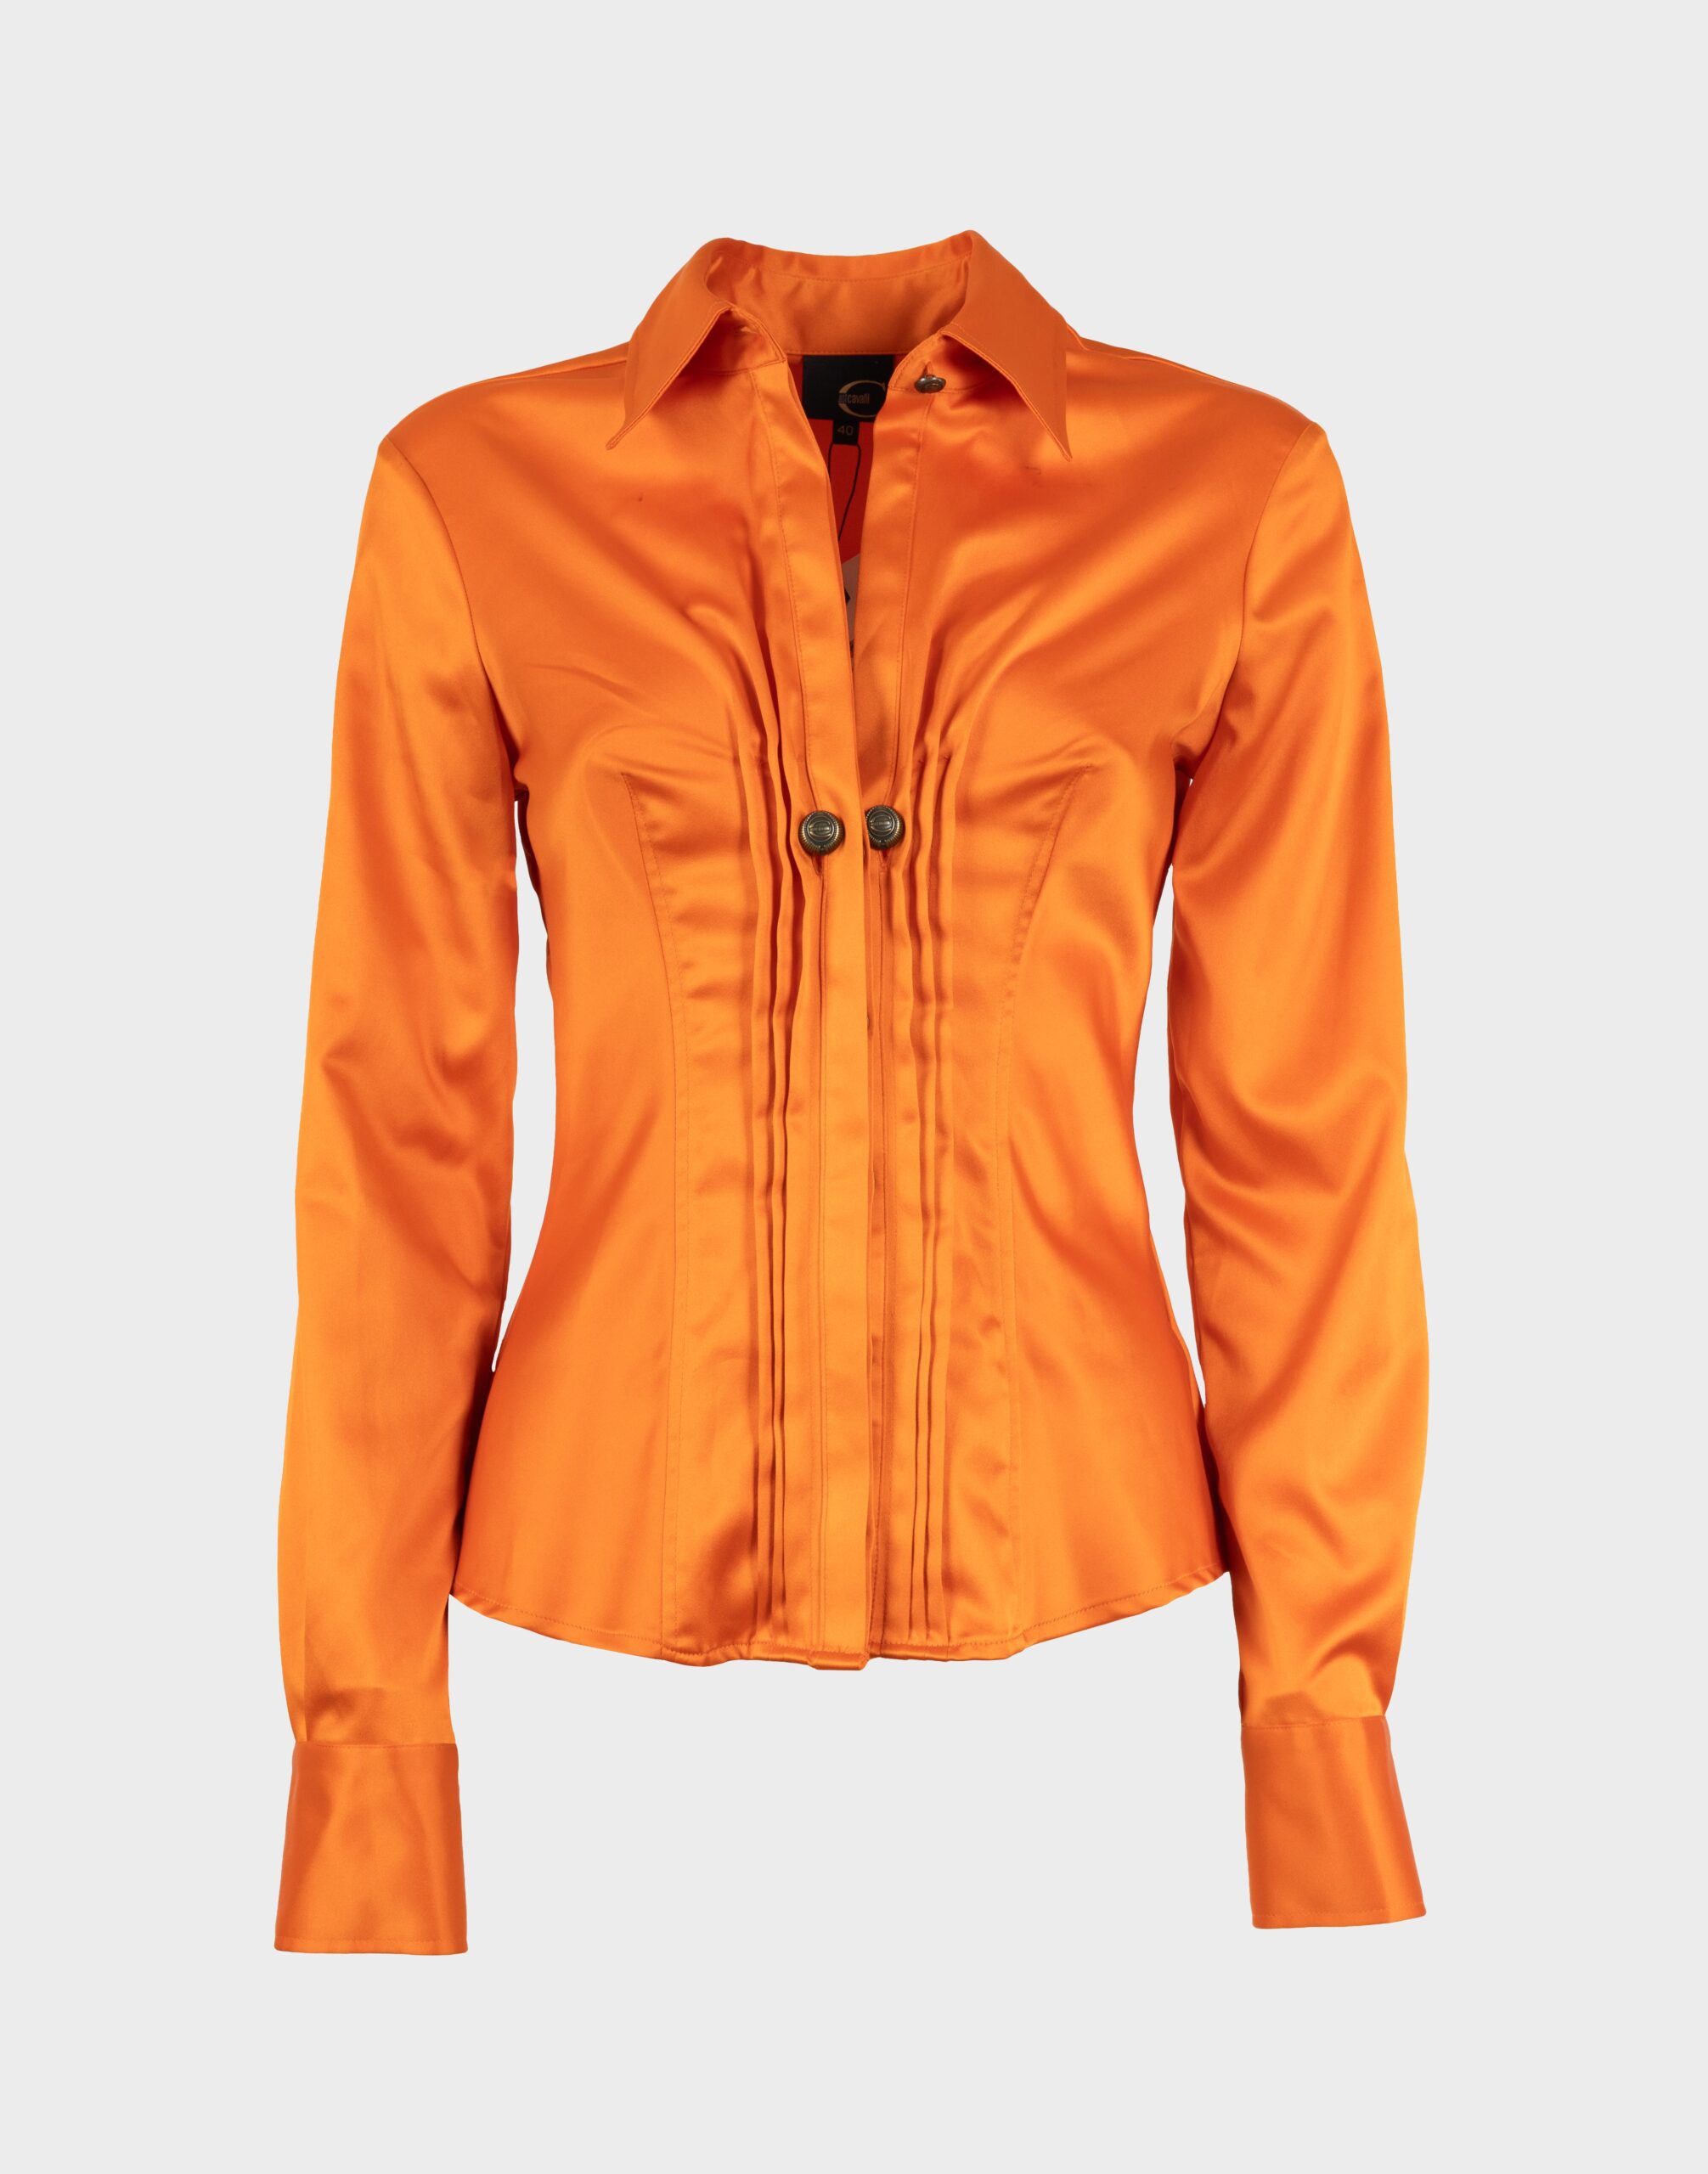 women's long-sleeved orange shirt with cuff, front gathers with logo hook